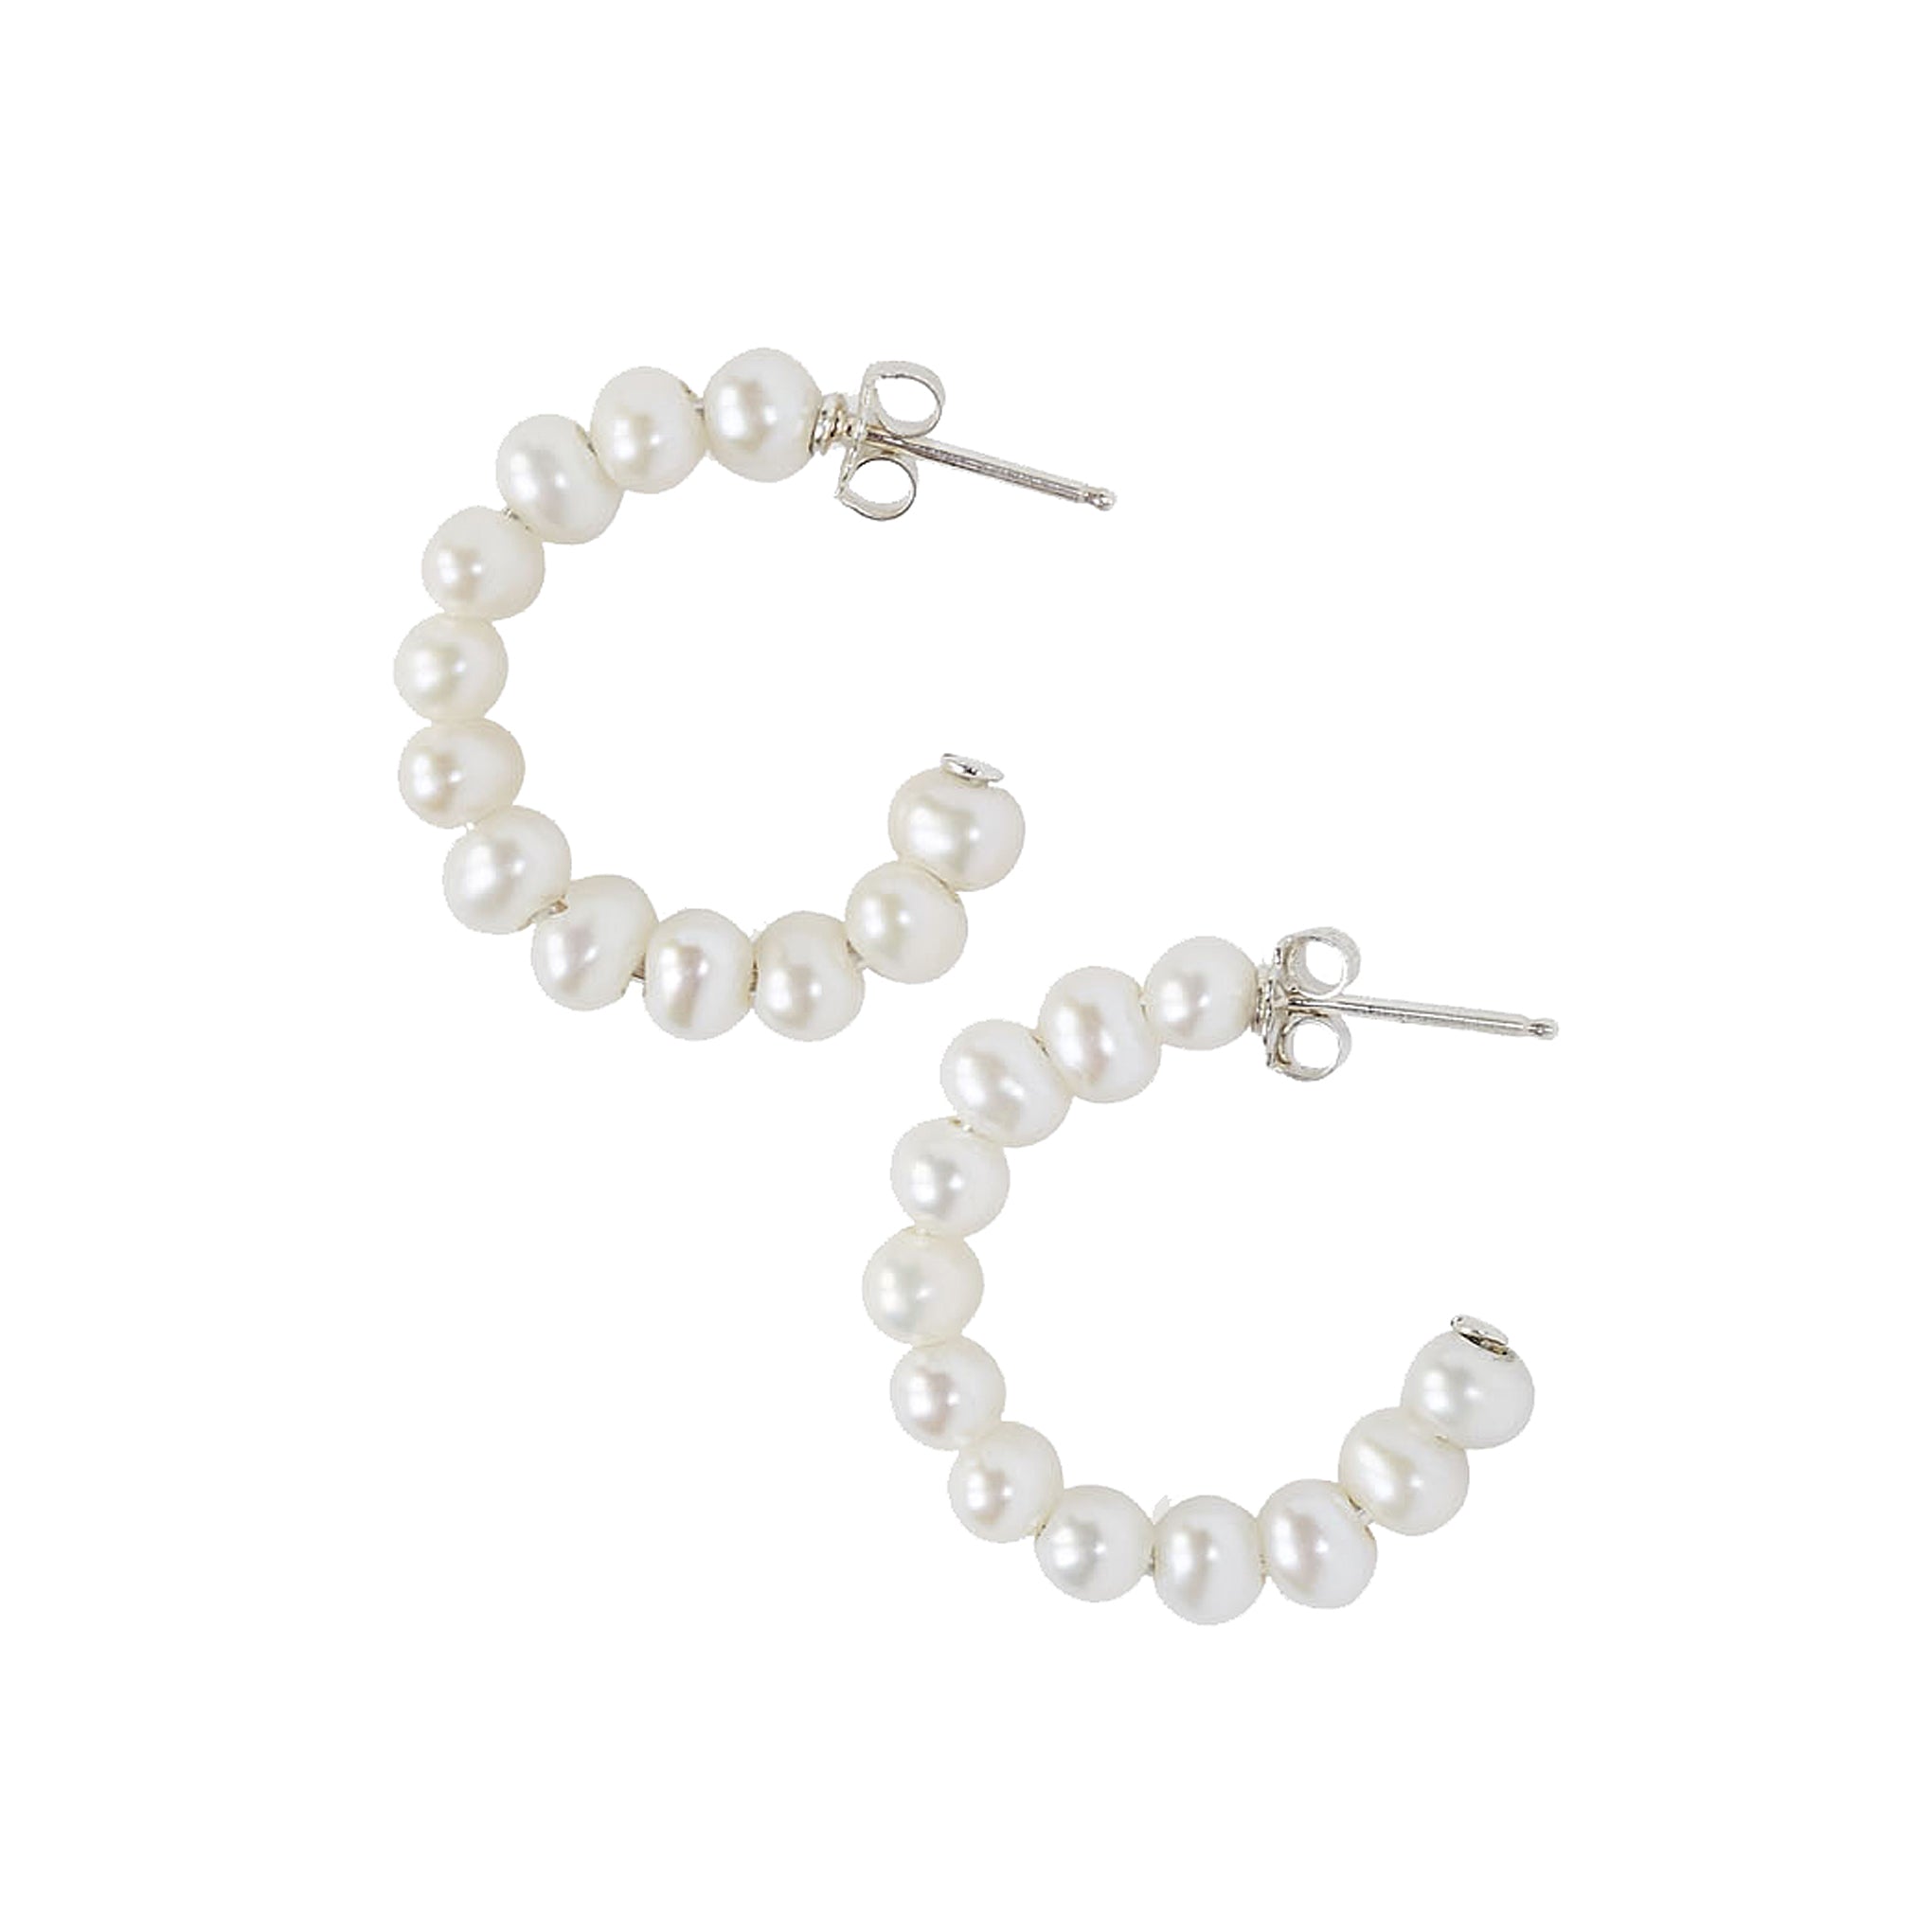 Chan Luu Small Holly Hoop Earrings in White Pearl and Sterling Silver